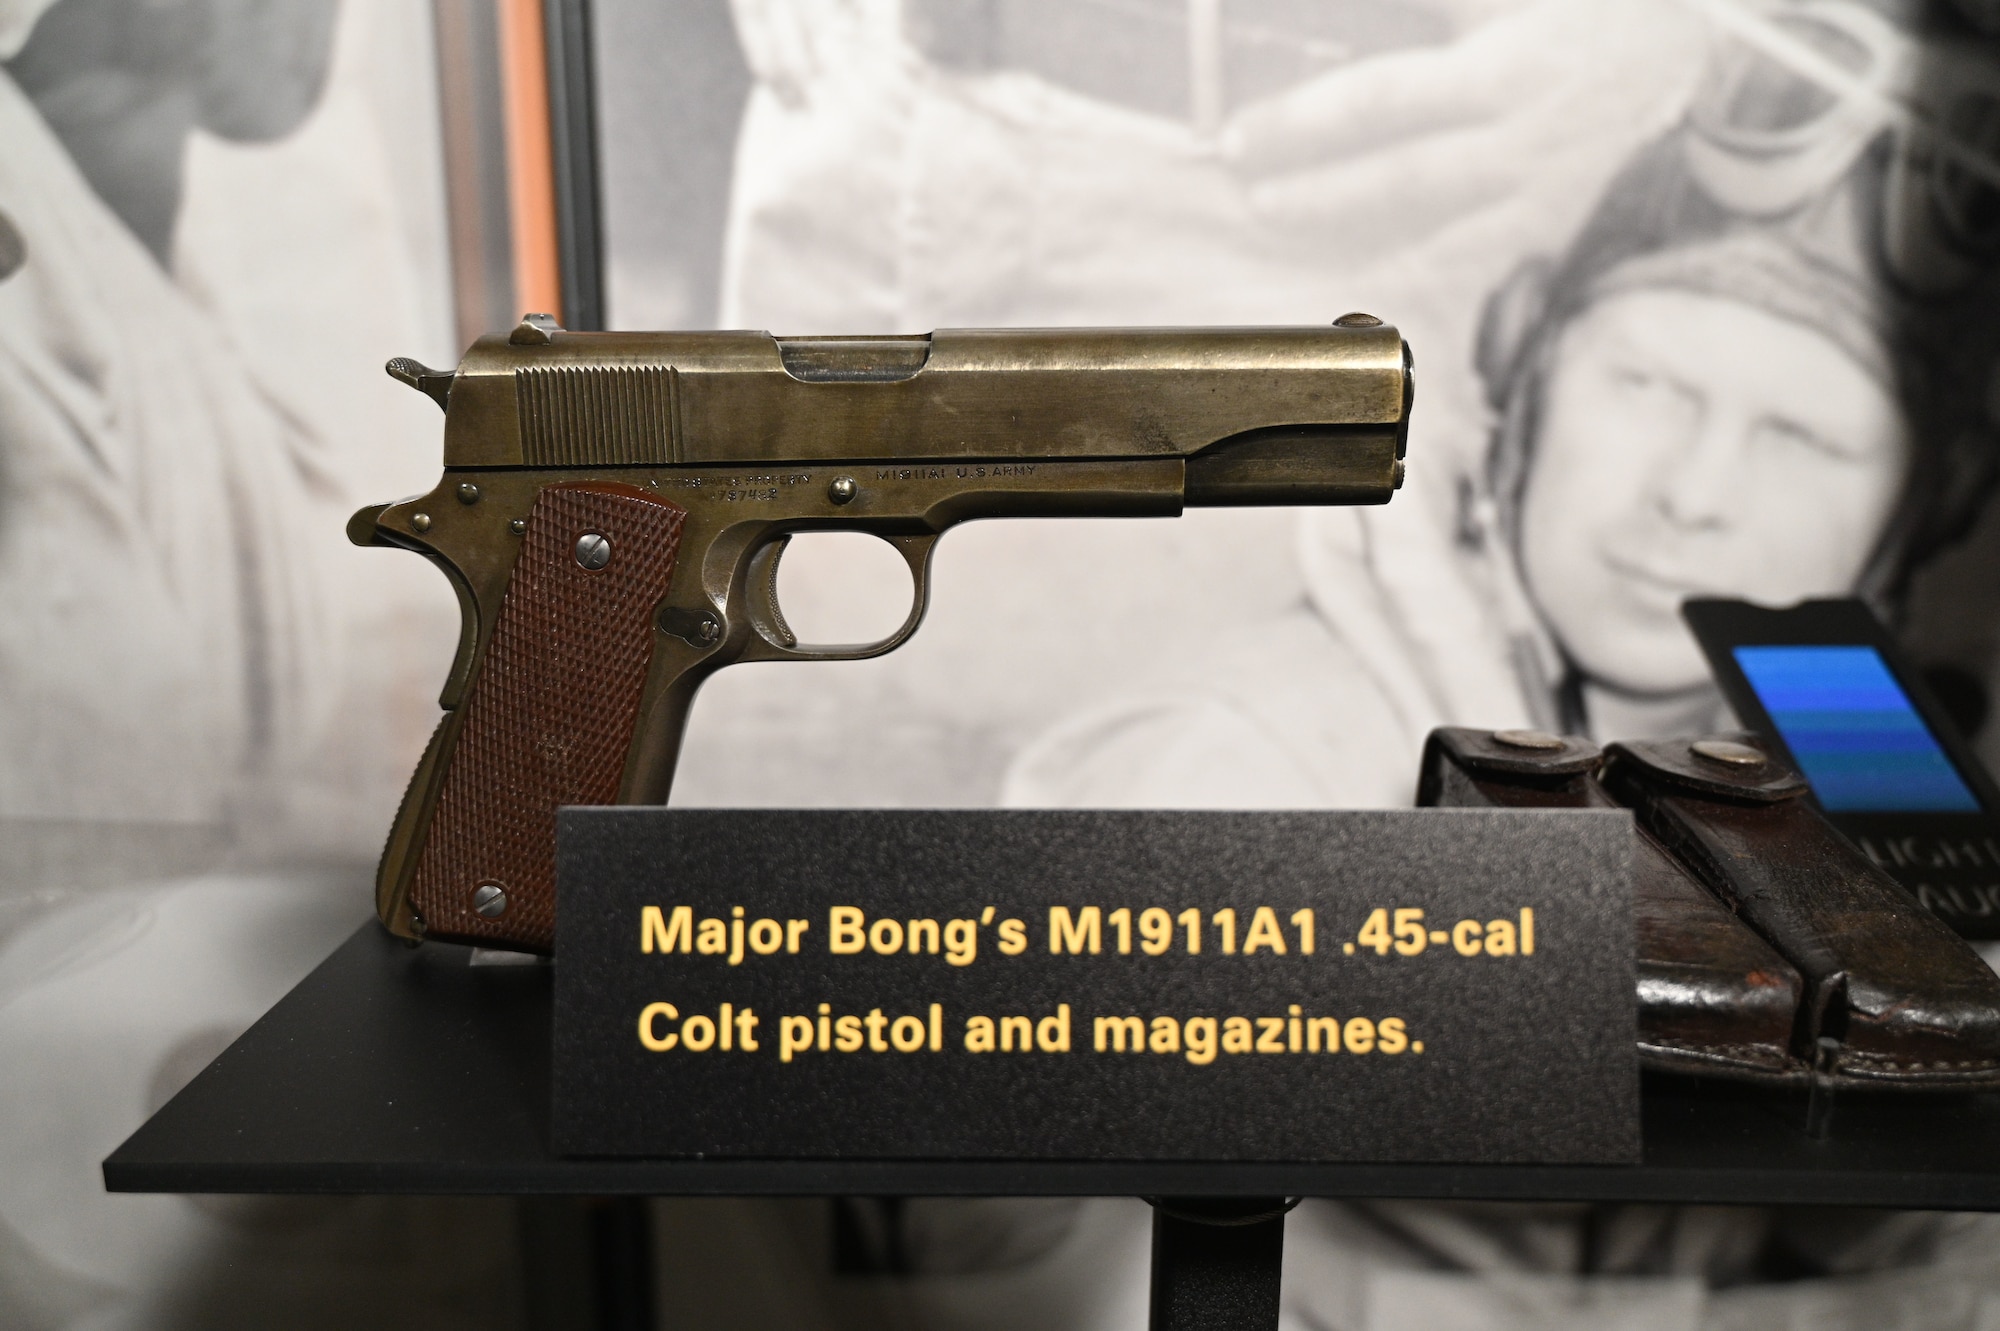 M1911A1 .45-cal Colt pistol and magazines belonging to Maj. Richard I. Bong on display in the WWII Gallery at the National Museum of the U.S. Air Force.